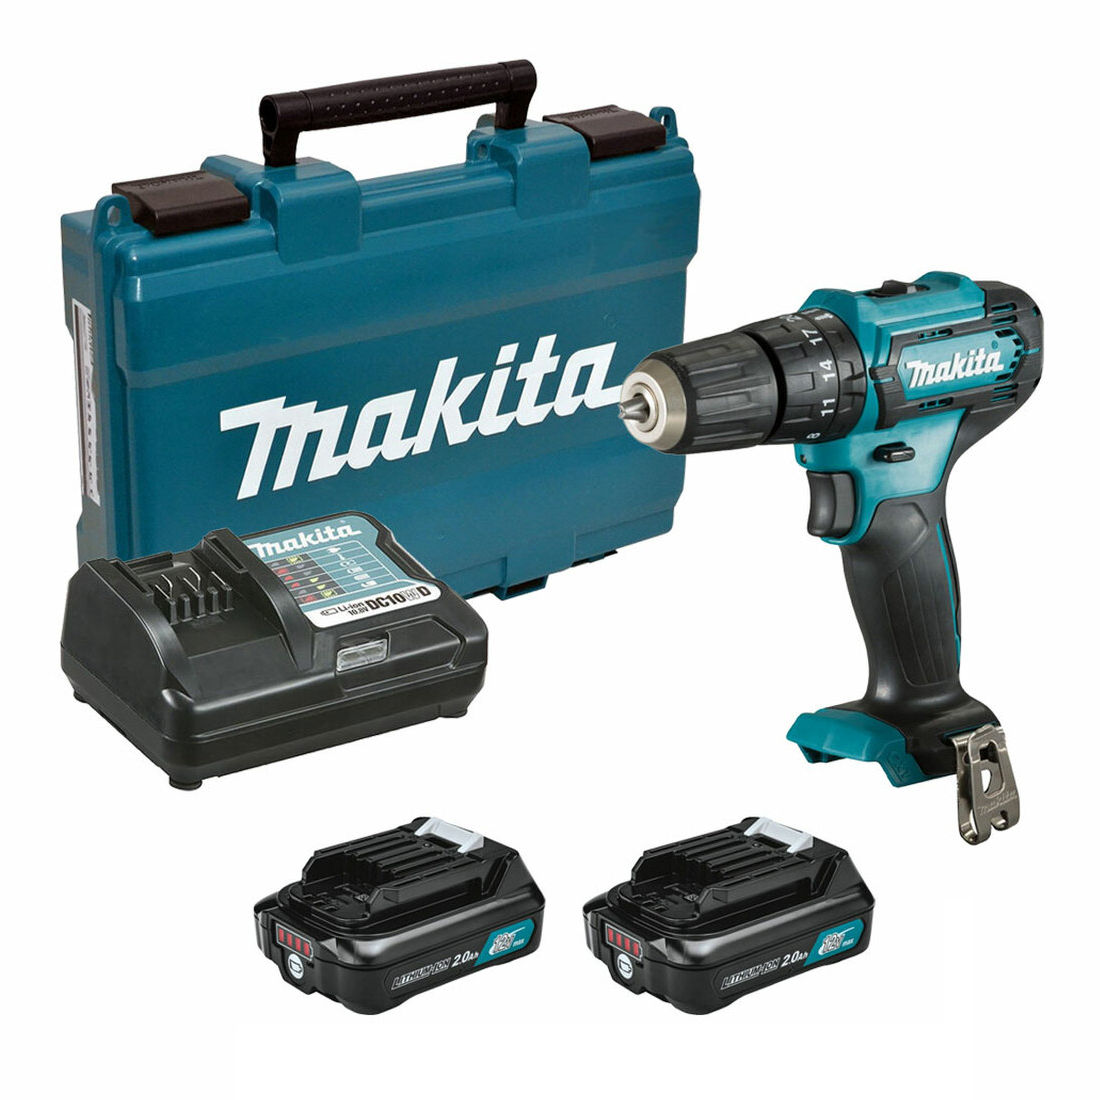 Makita HP333DZ 12V Max Li-ion CXT Combi Drill Batteries and Charger Not Included 